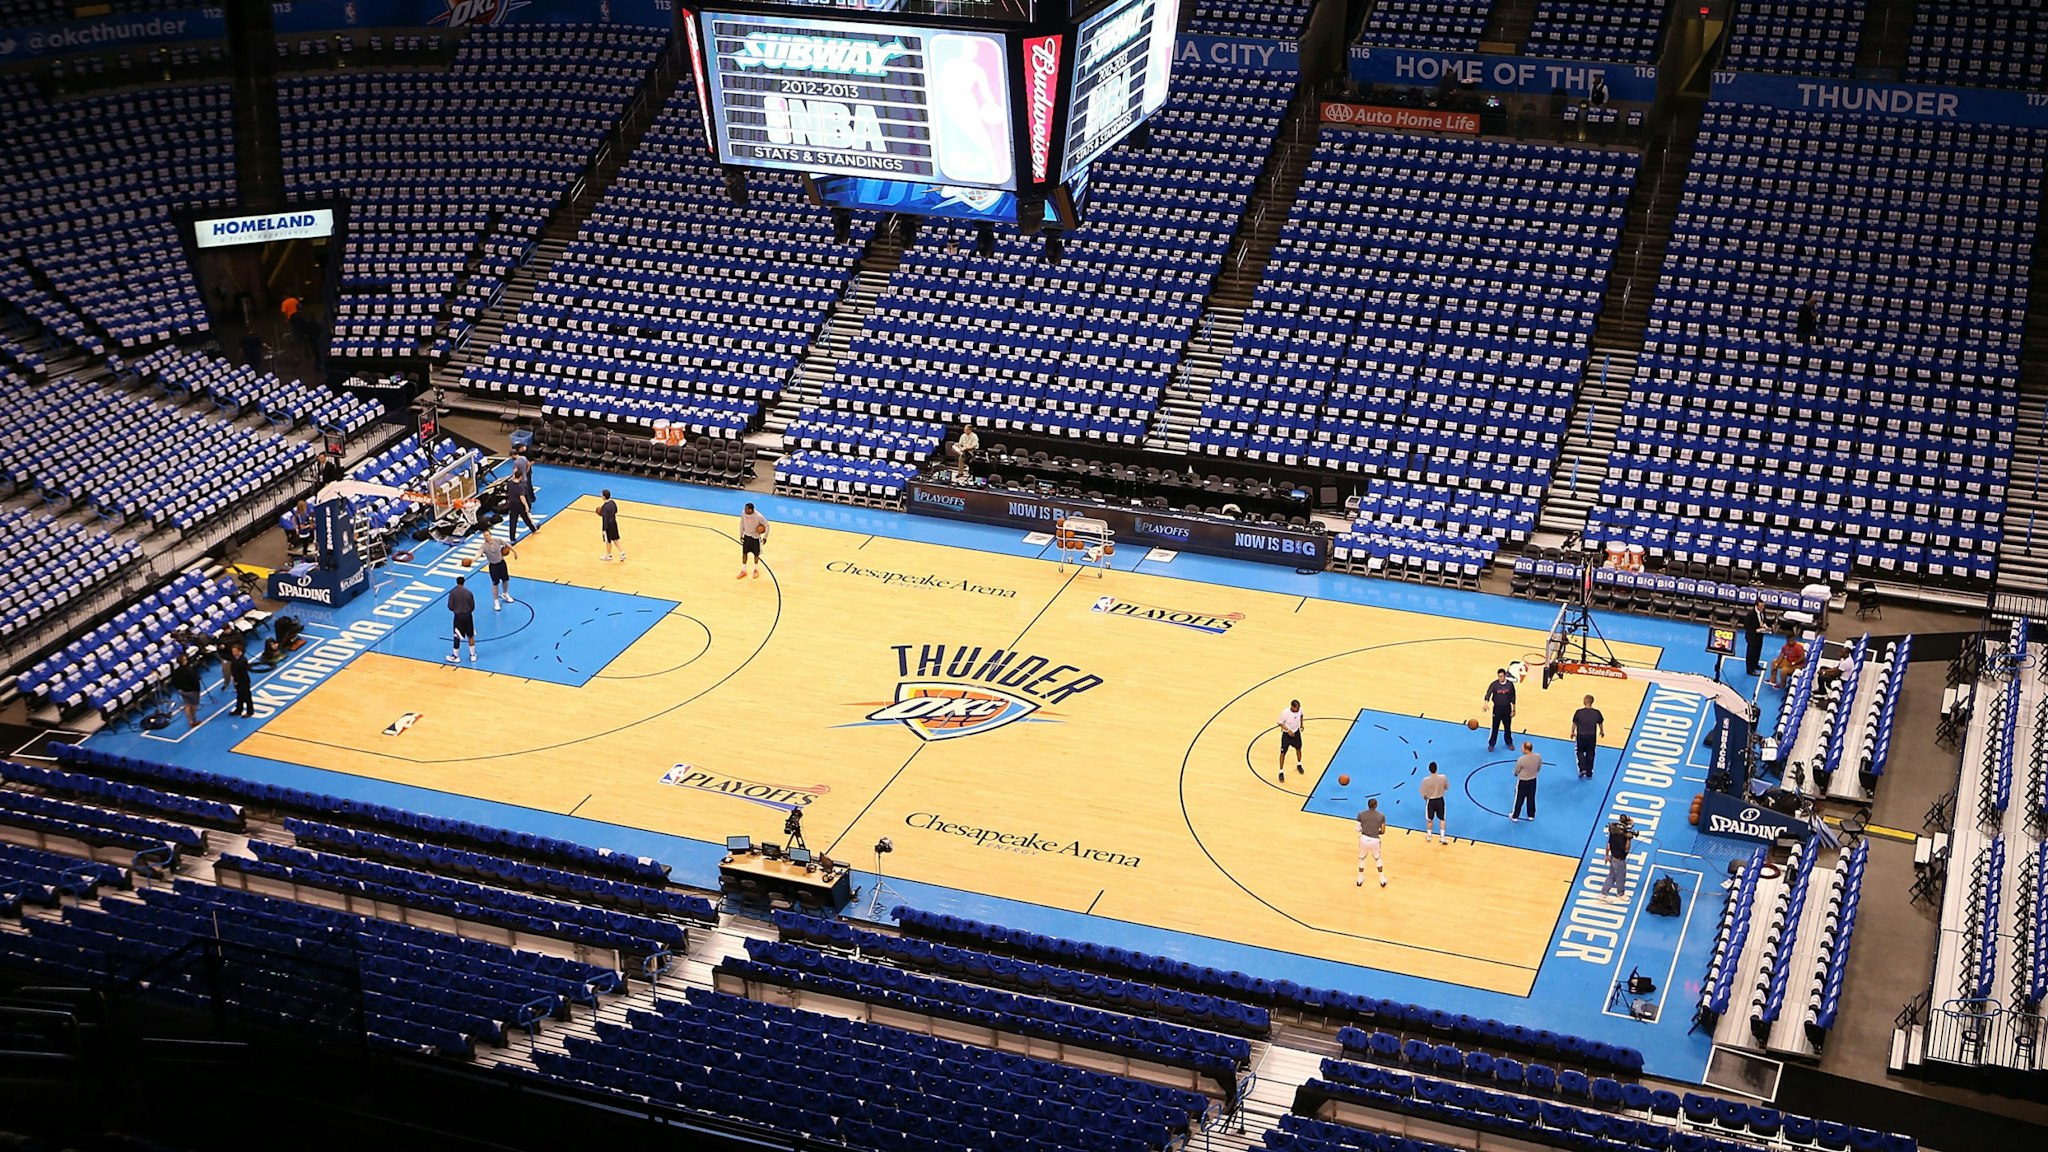 OKLAHOMA CITY, OK - APRIL 21: General view as players and coaches practice on the court before Game One of the Western Conference Quarterfinals of the 2013 NBA Playoffs between the Houston Rockets and the Oklahoma City Thunder at Chesapeake Energy Arena on April 21, 2013 in Oklahoma City, Oklahoma.